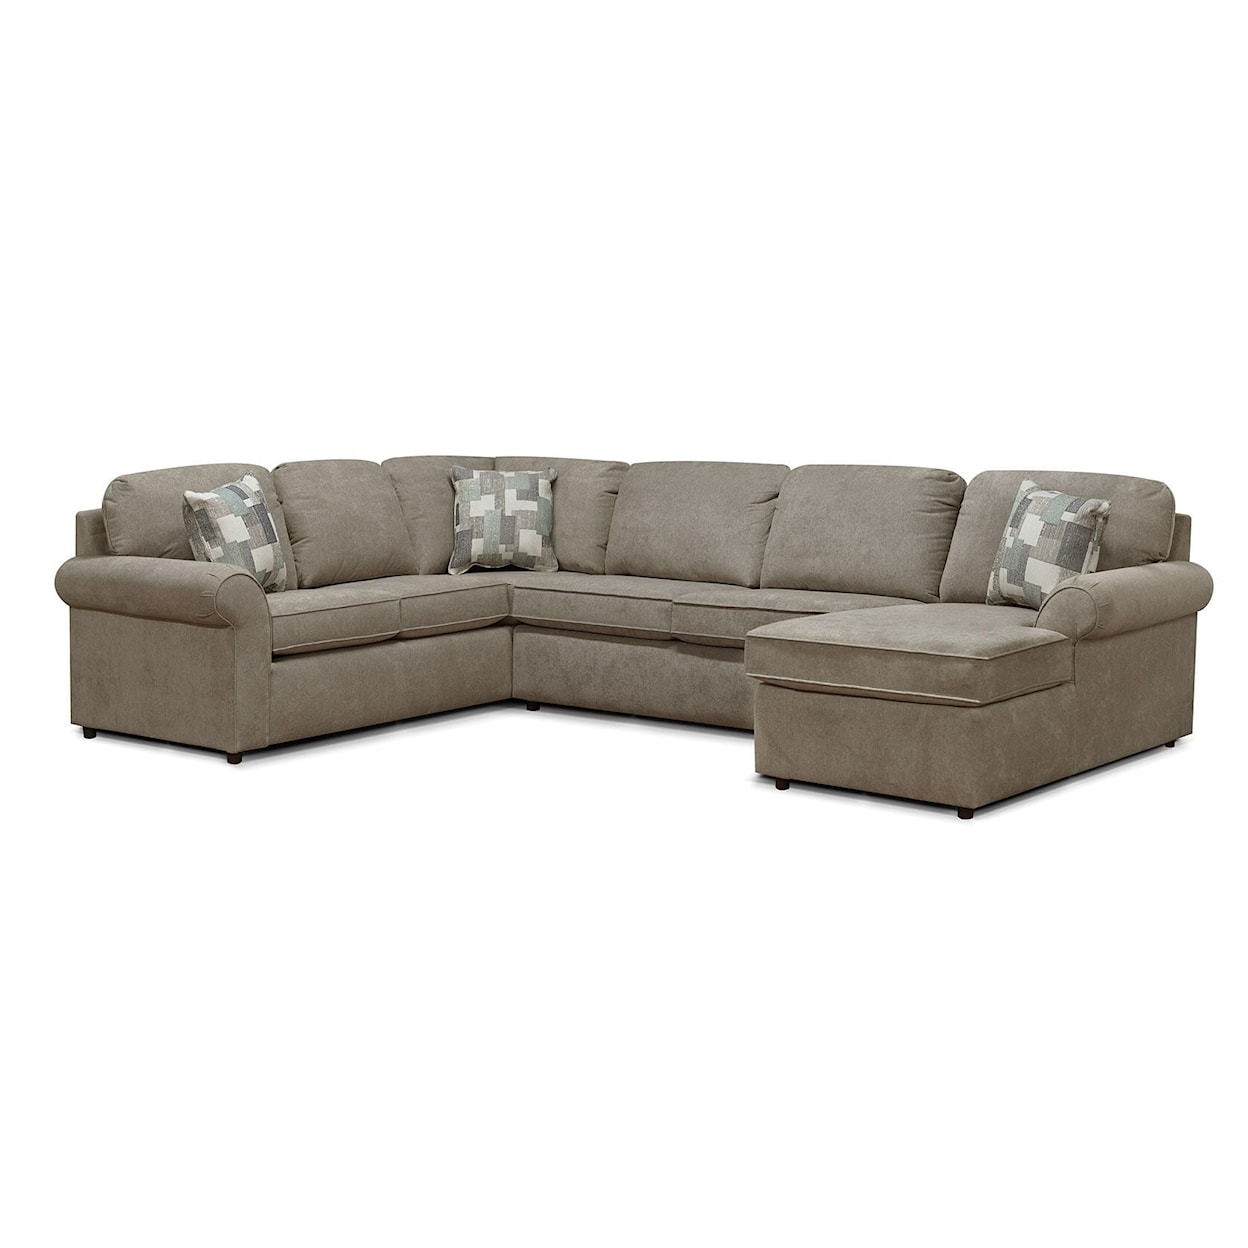 England Tansy 3-Piece Sectional Chaise Sofa